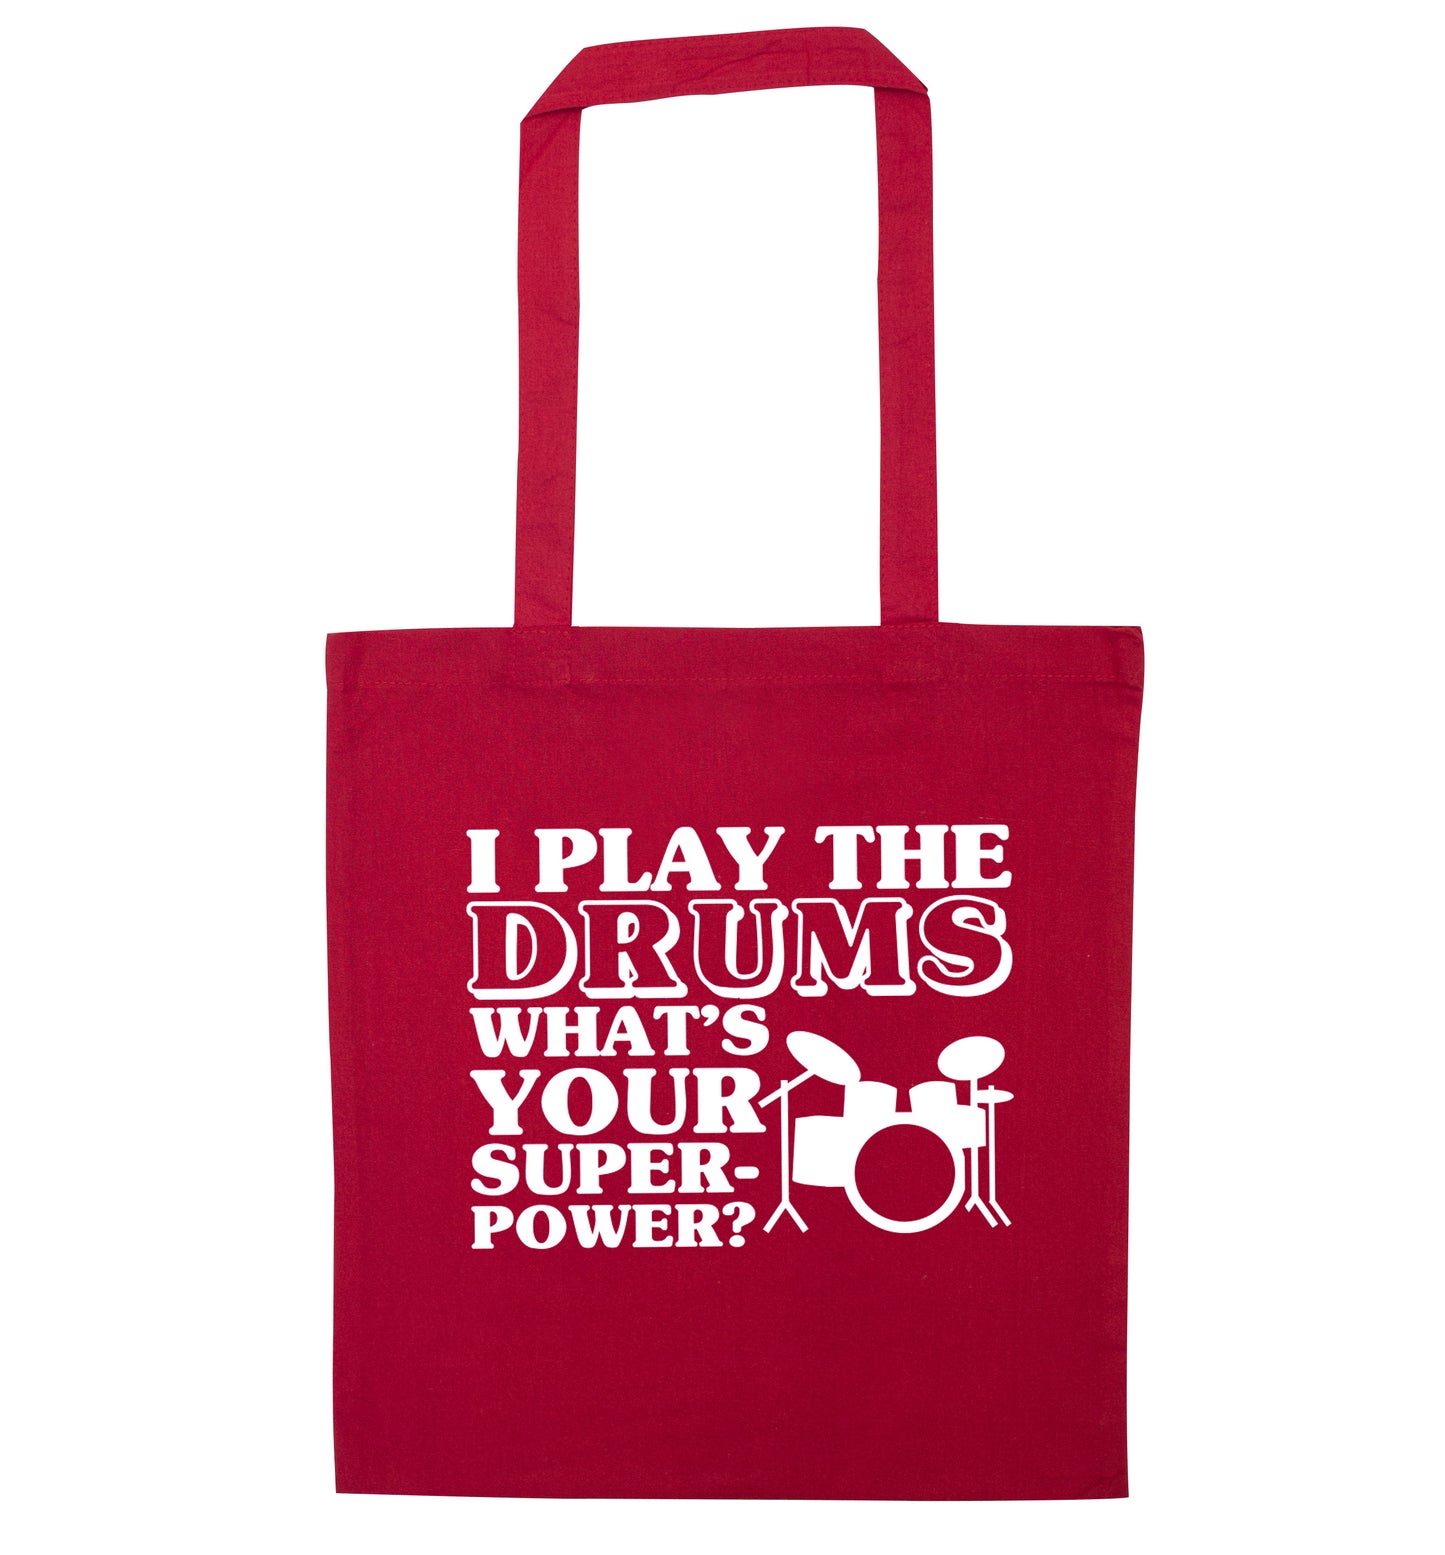 I play the drums what's your superpower? red tote bag